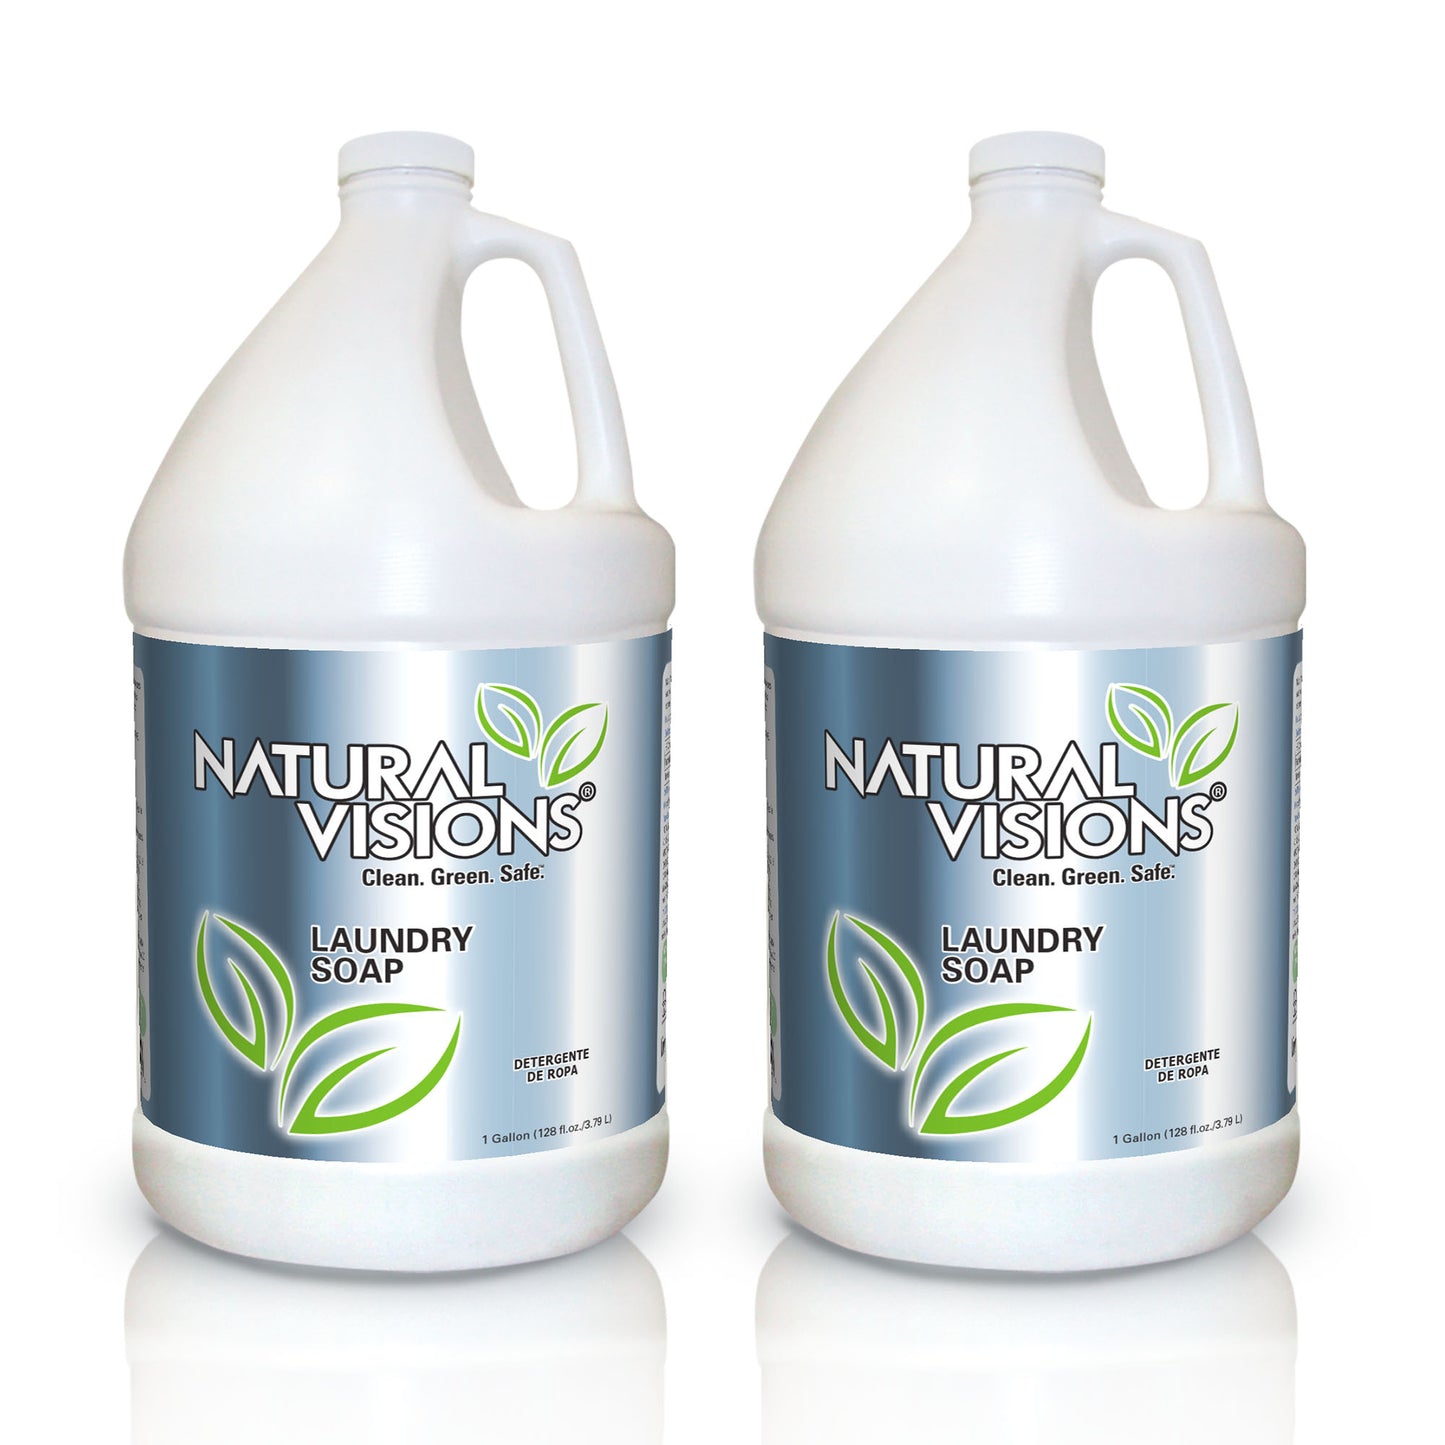 2 Gallons of Natural Visions® Laundry Soap